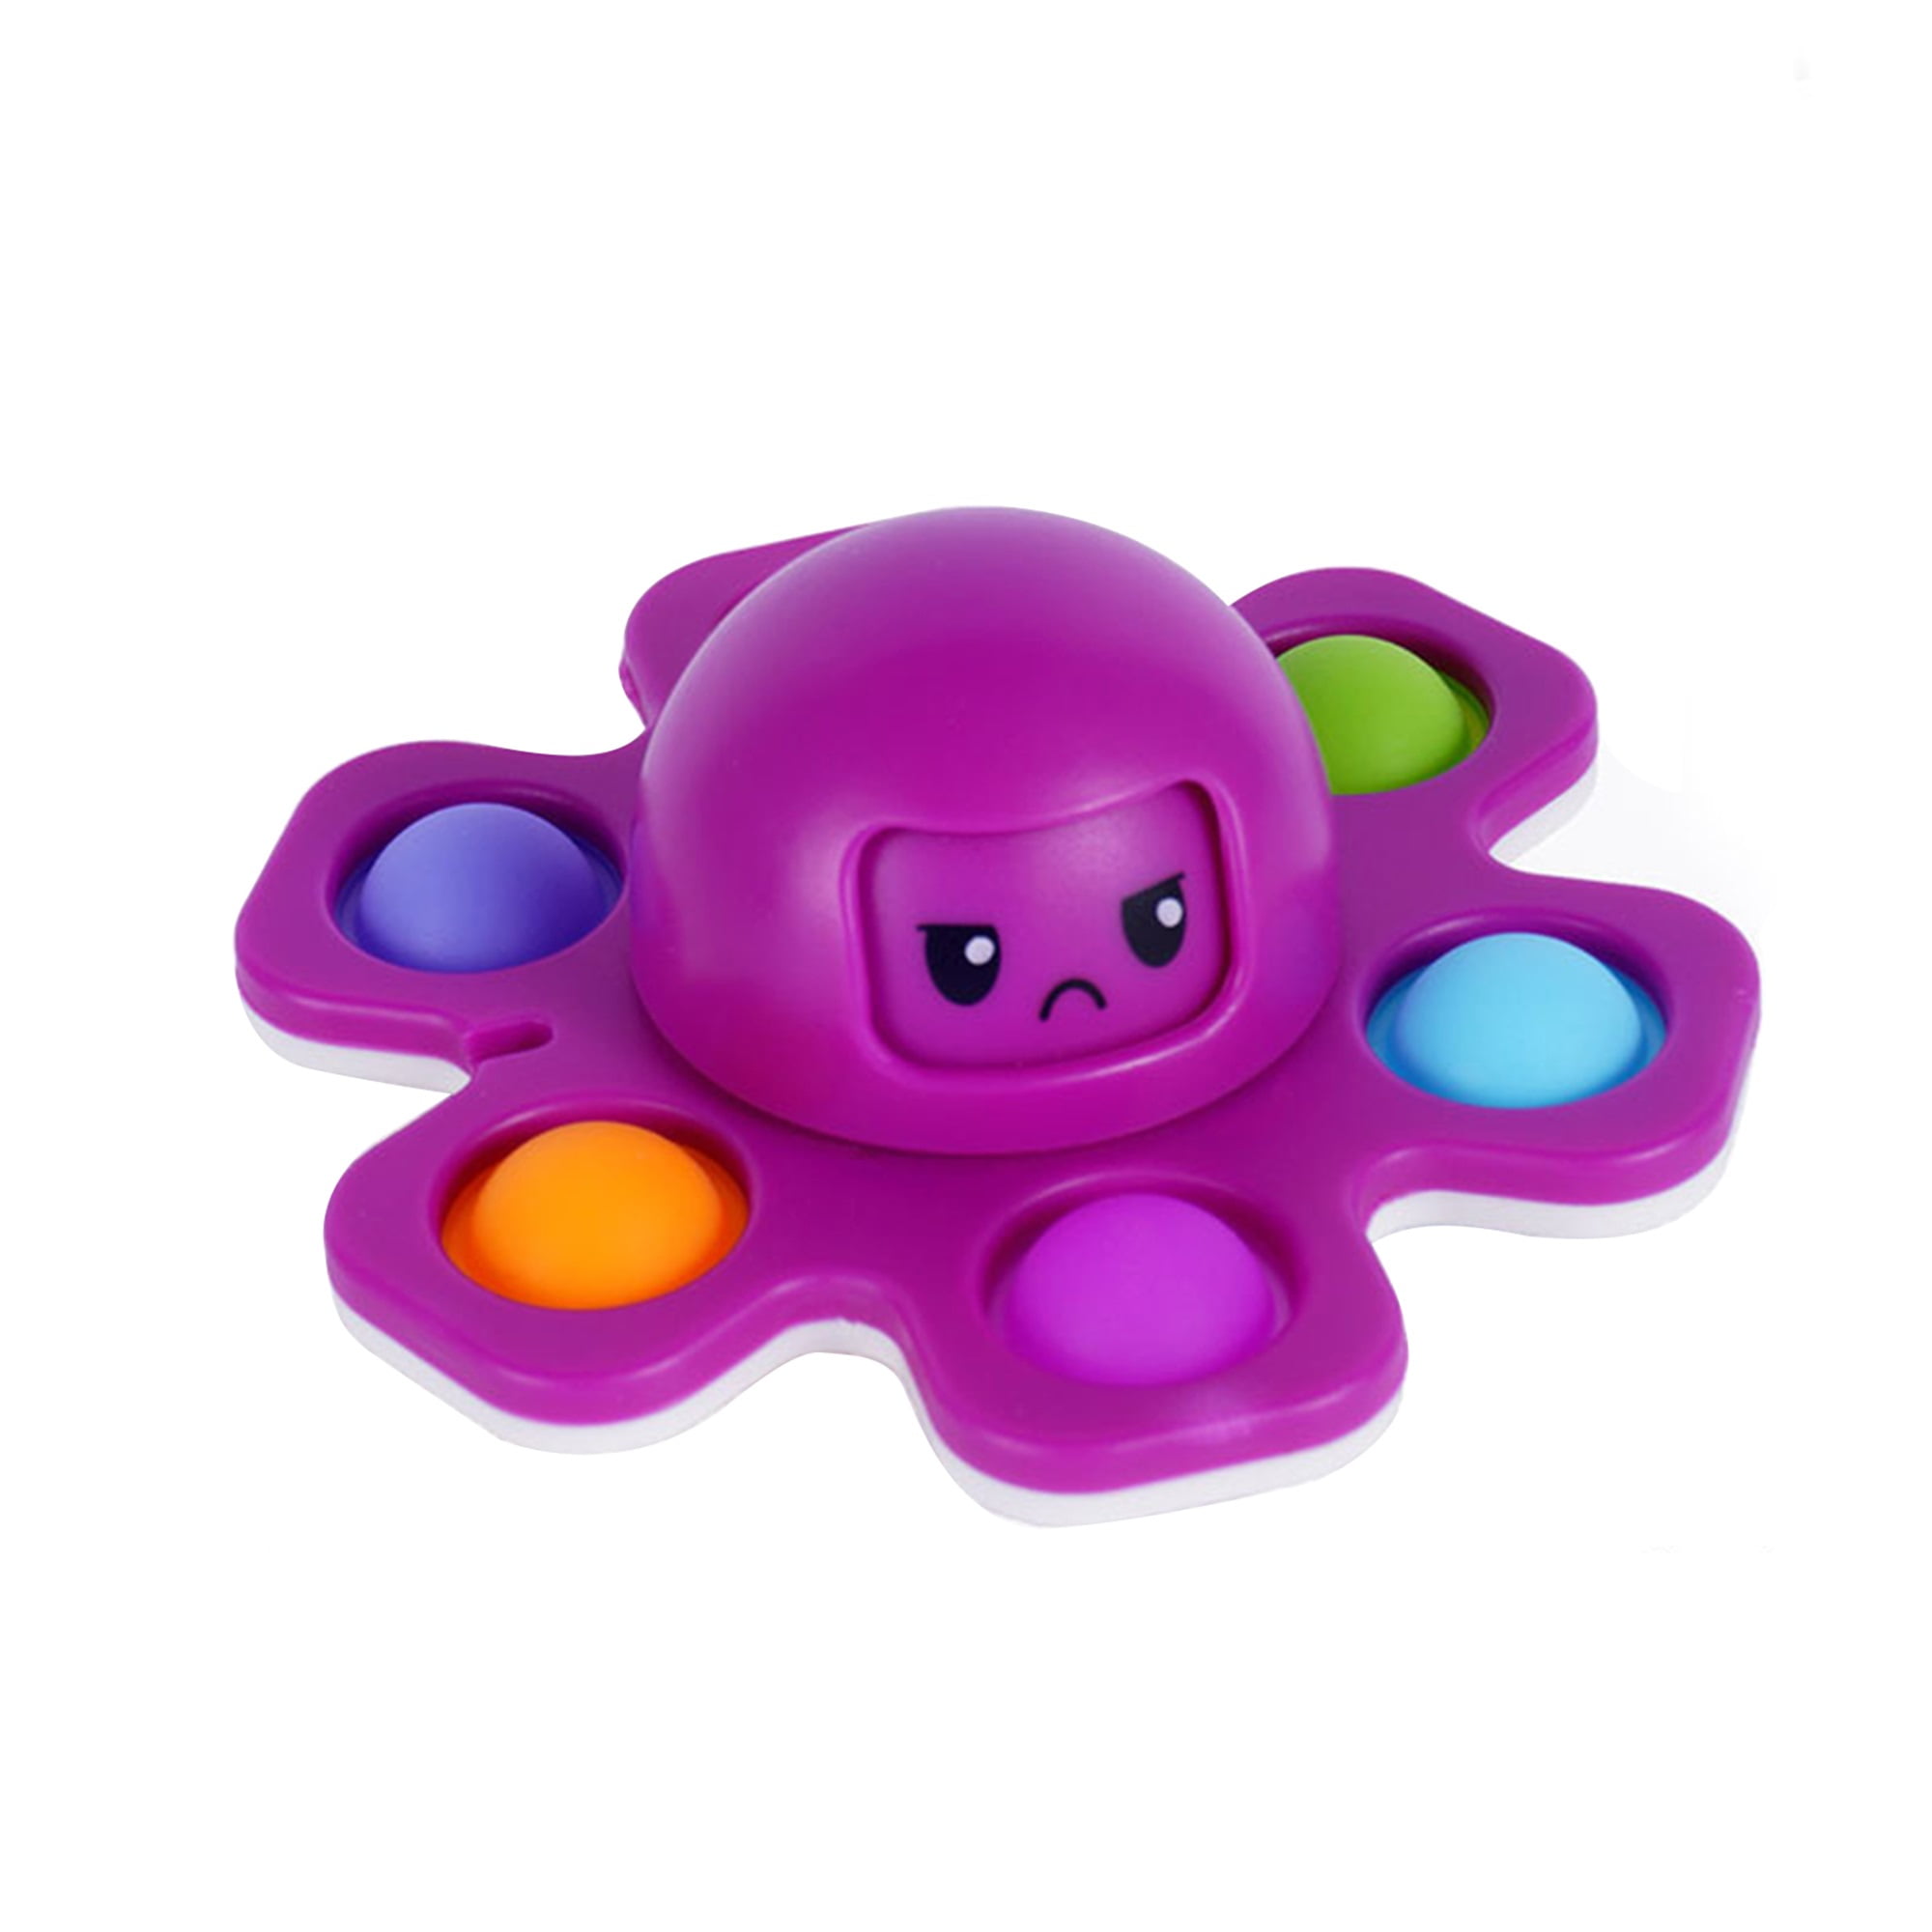 Octopus Bubble Fidget Spinner Anti Stress Push Button Face Change Toy For Kids 